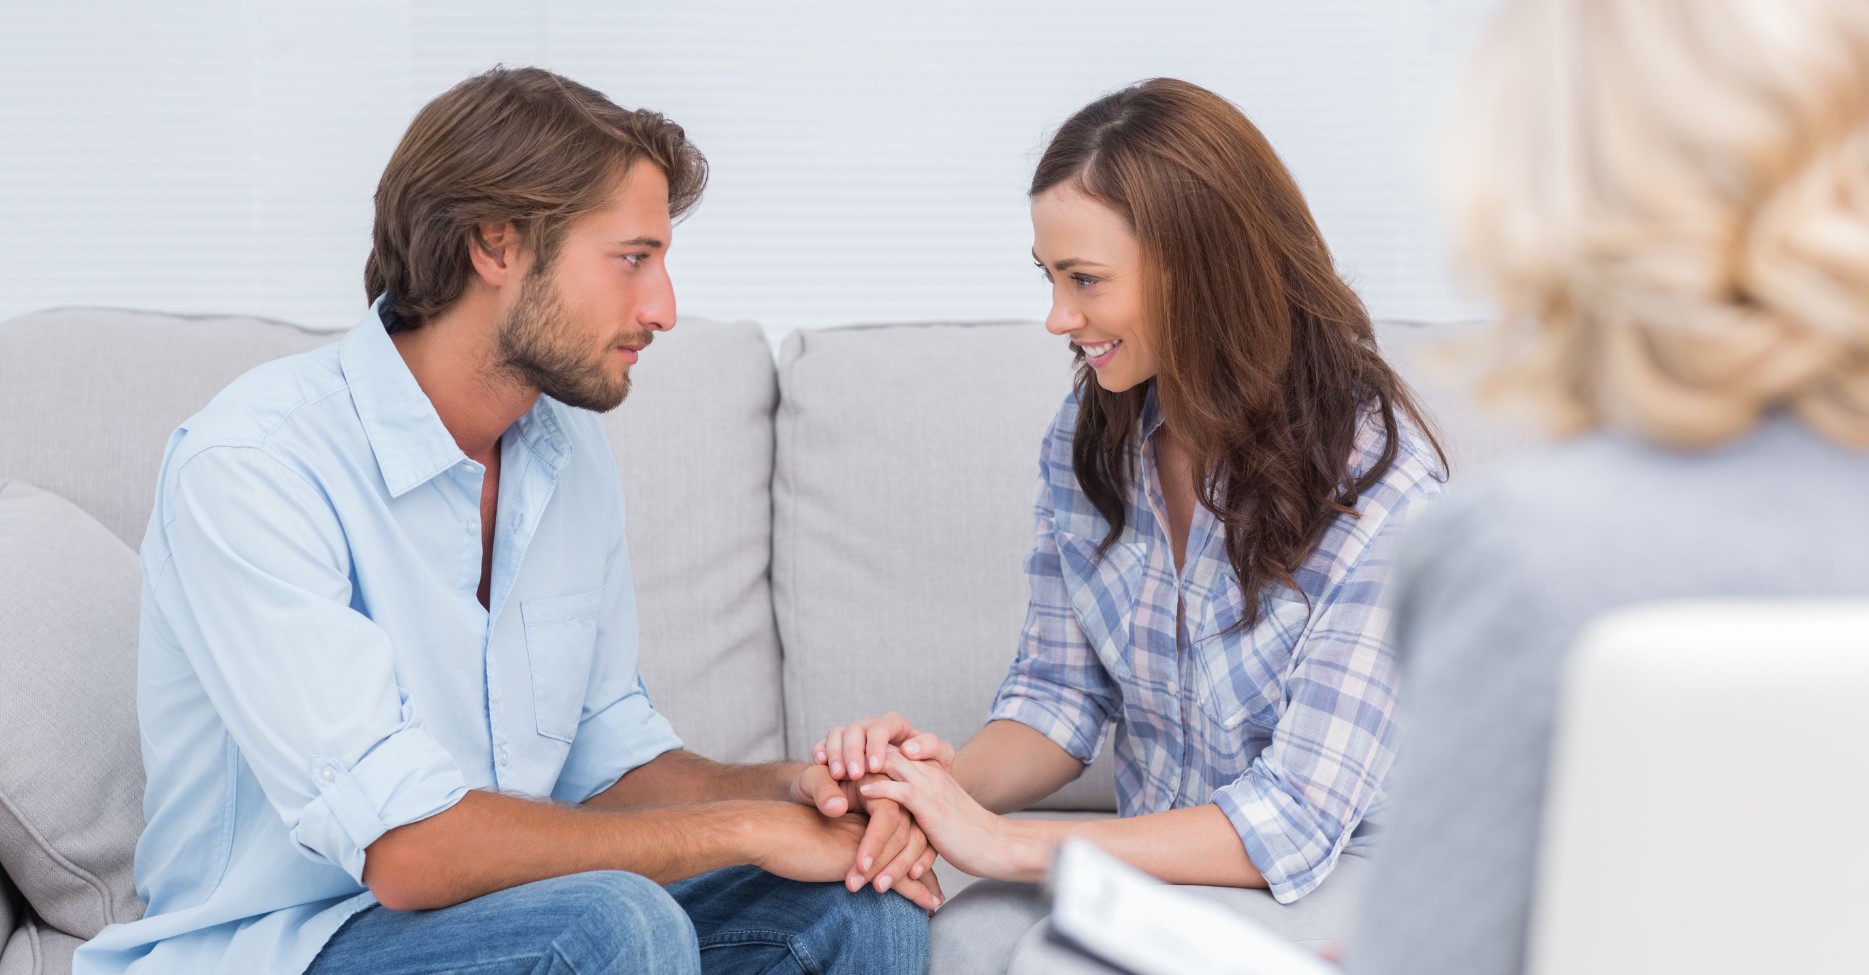 Couples Therapy: Finding a New Person to Strengthen Your Relationship